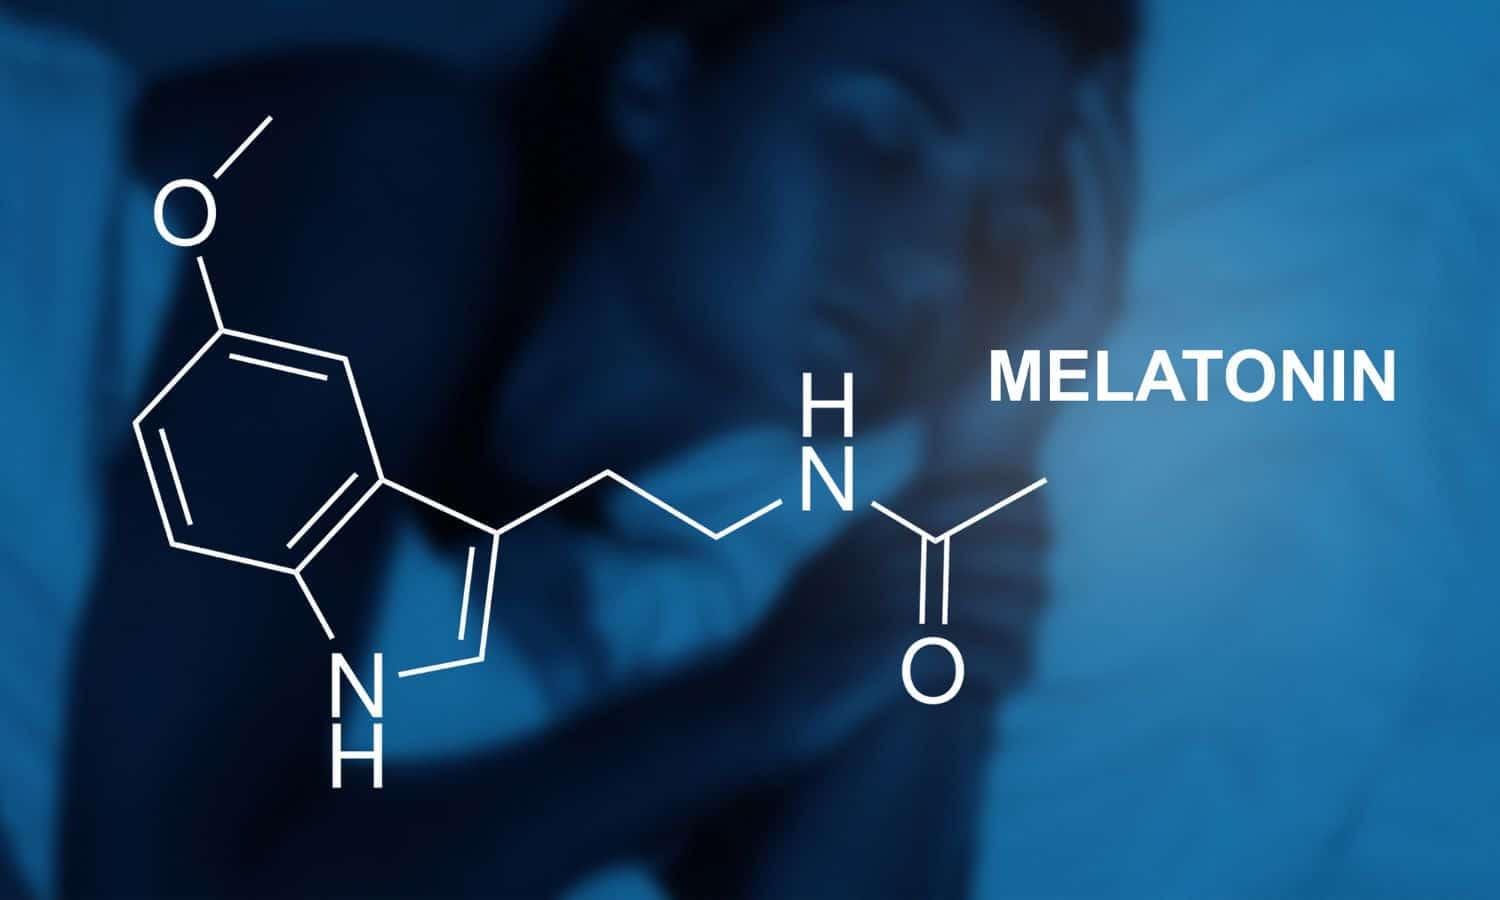 Melatonin chemical structure displayed against a midnight-blue backdrop.